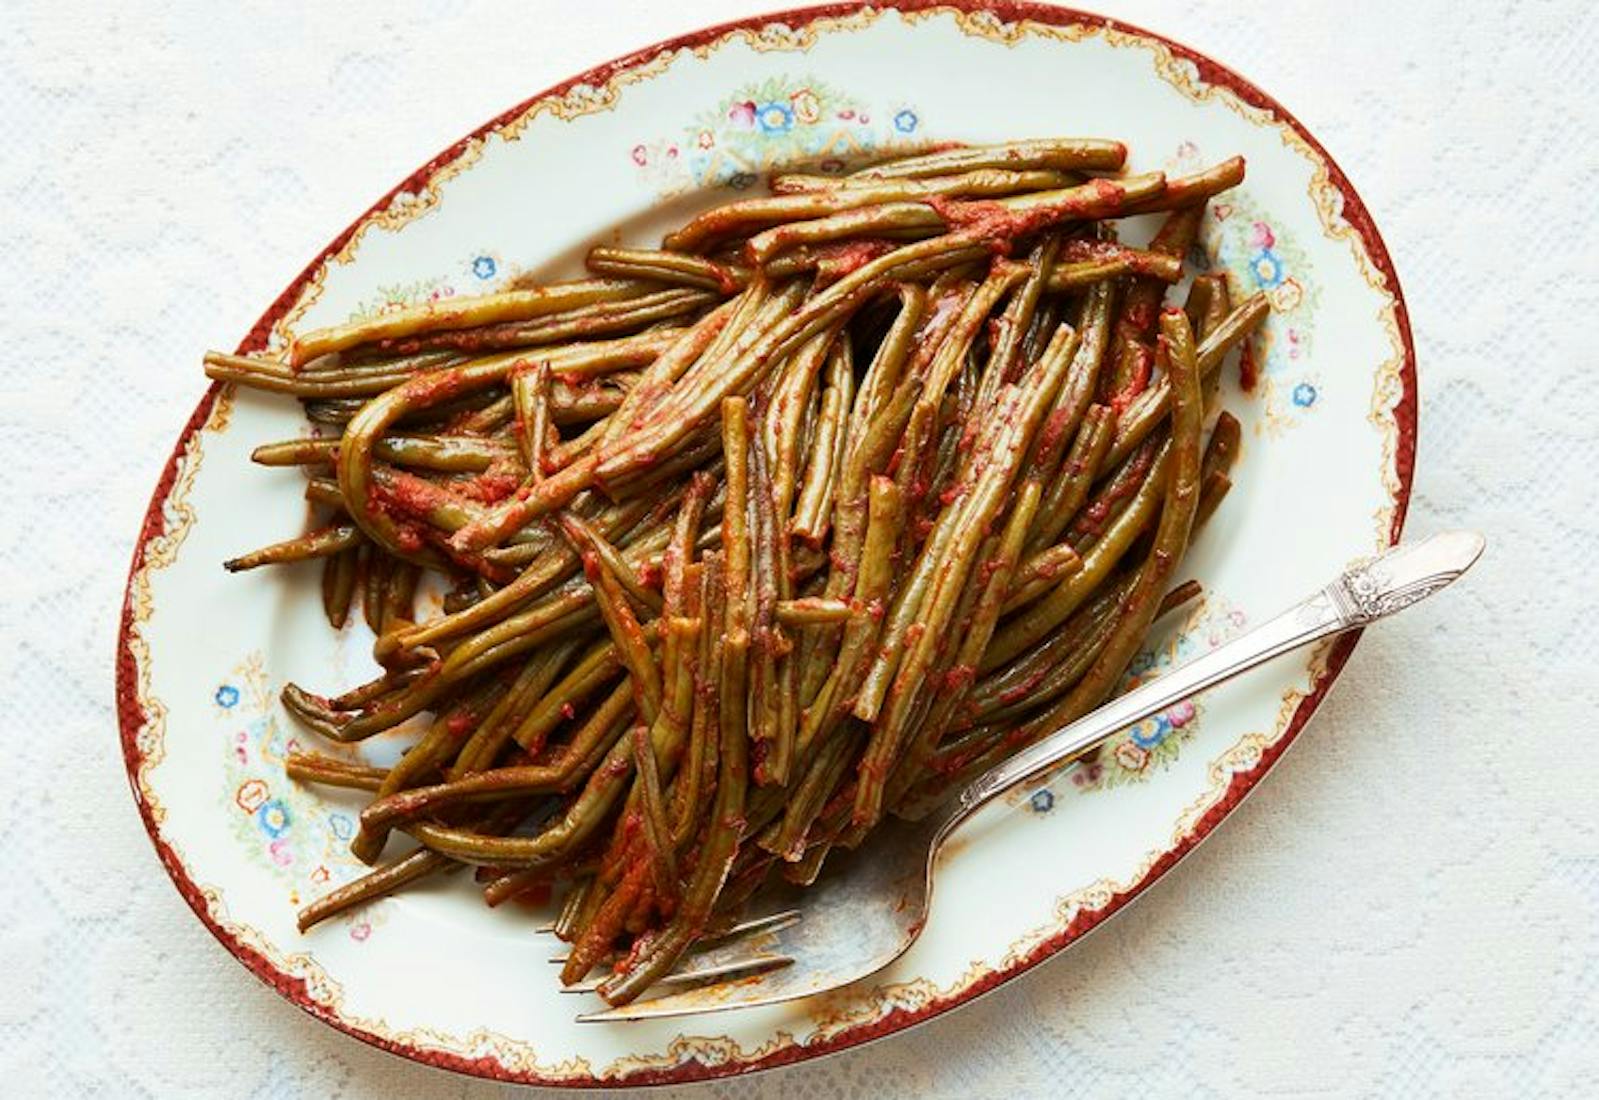 String beans in tomato sauce on oblong floral dish.